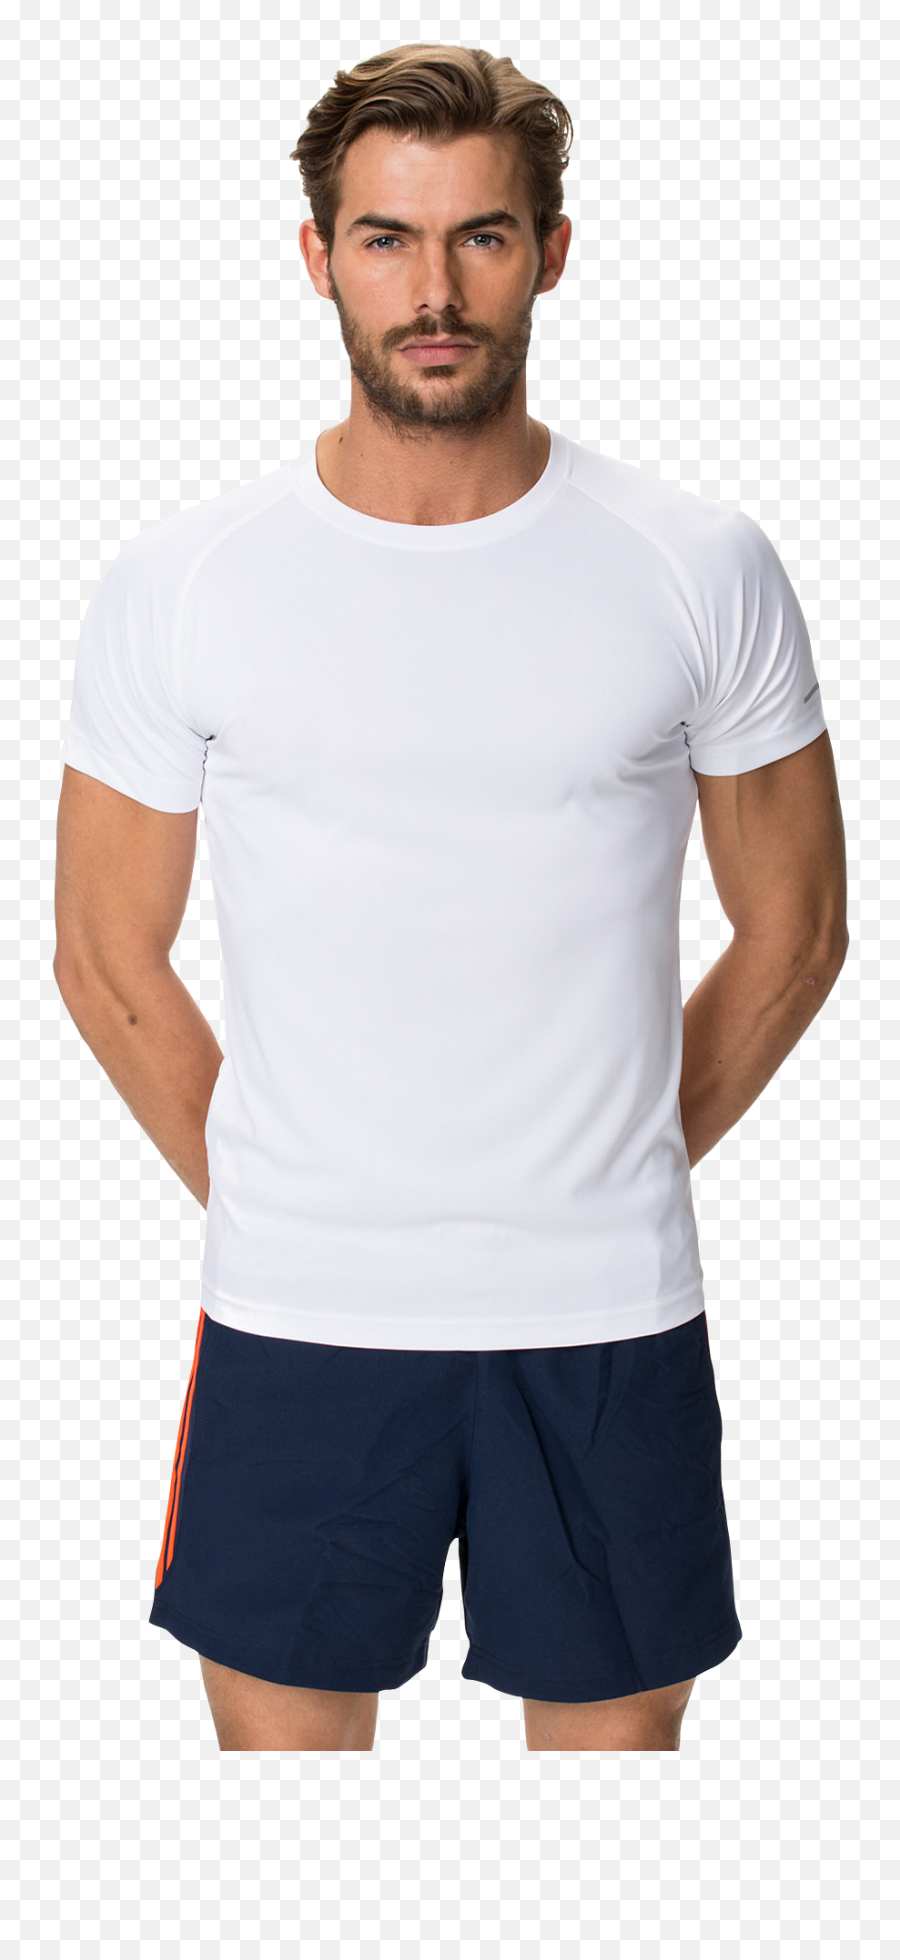 Download Sports Wear Png Image For Free Clothing